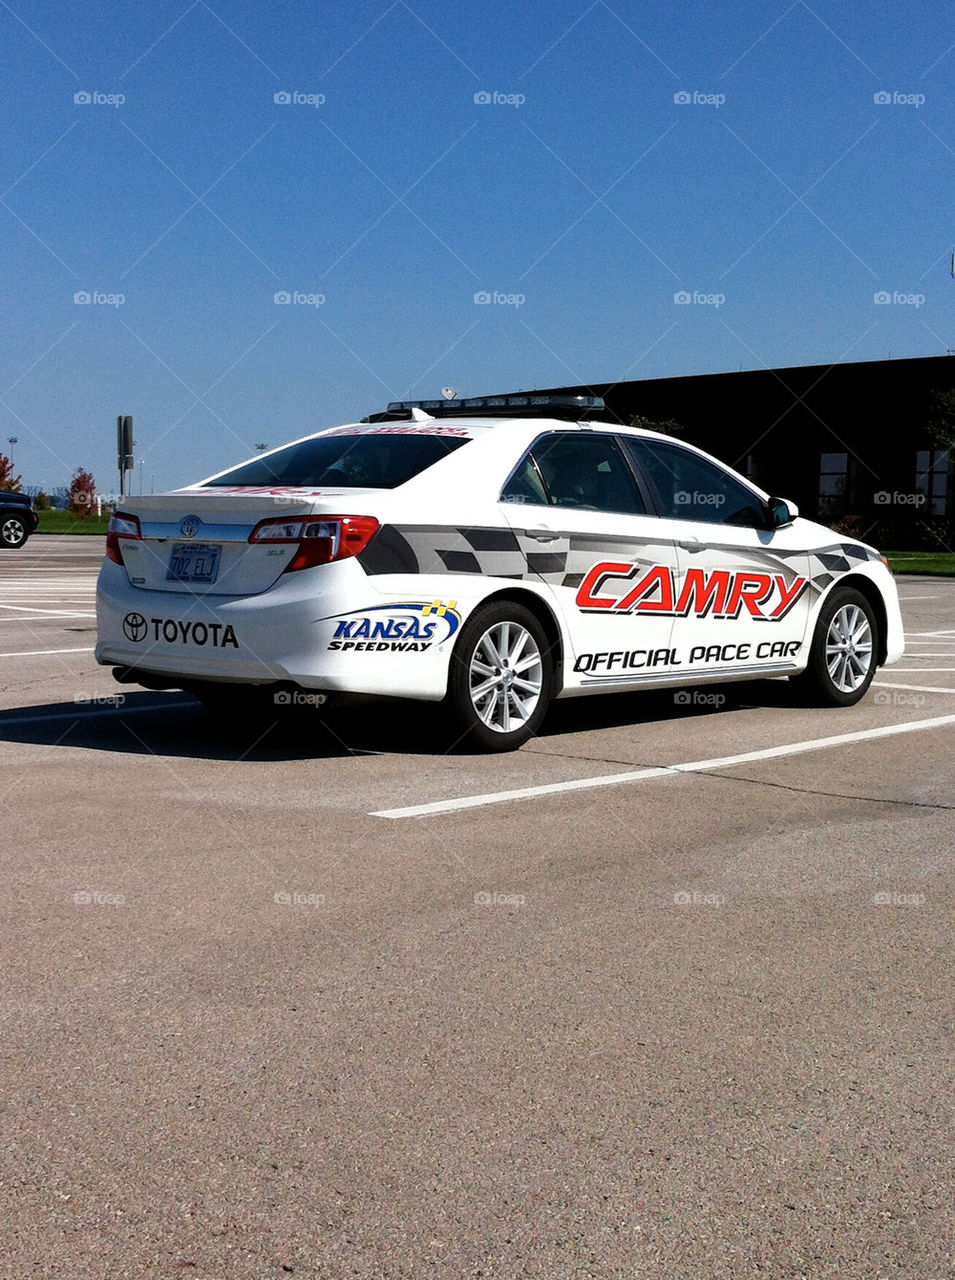 The official pace car of the Kansas Speedway.